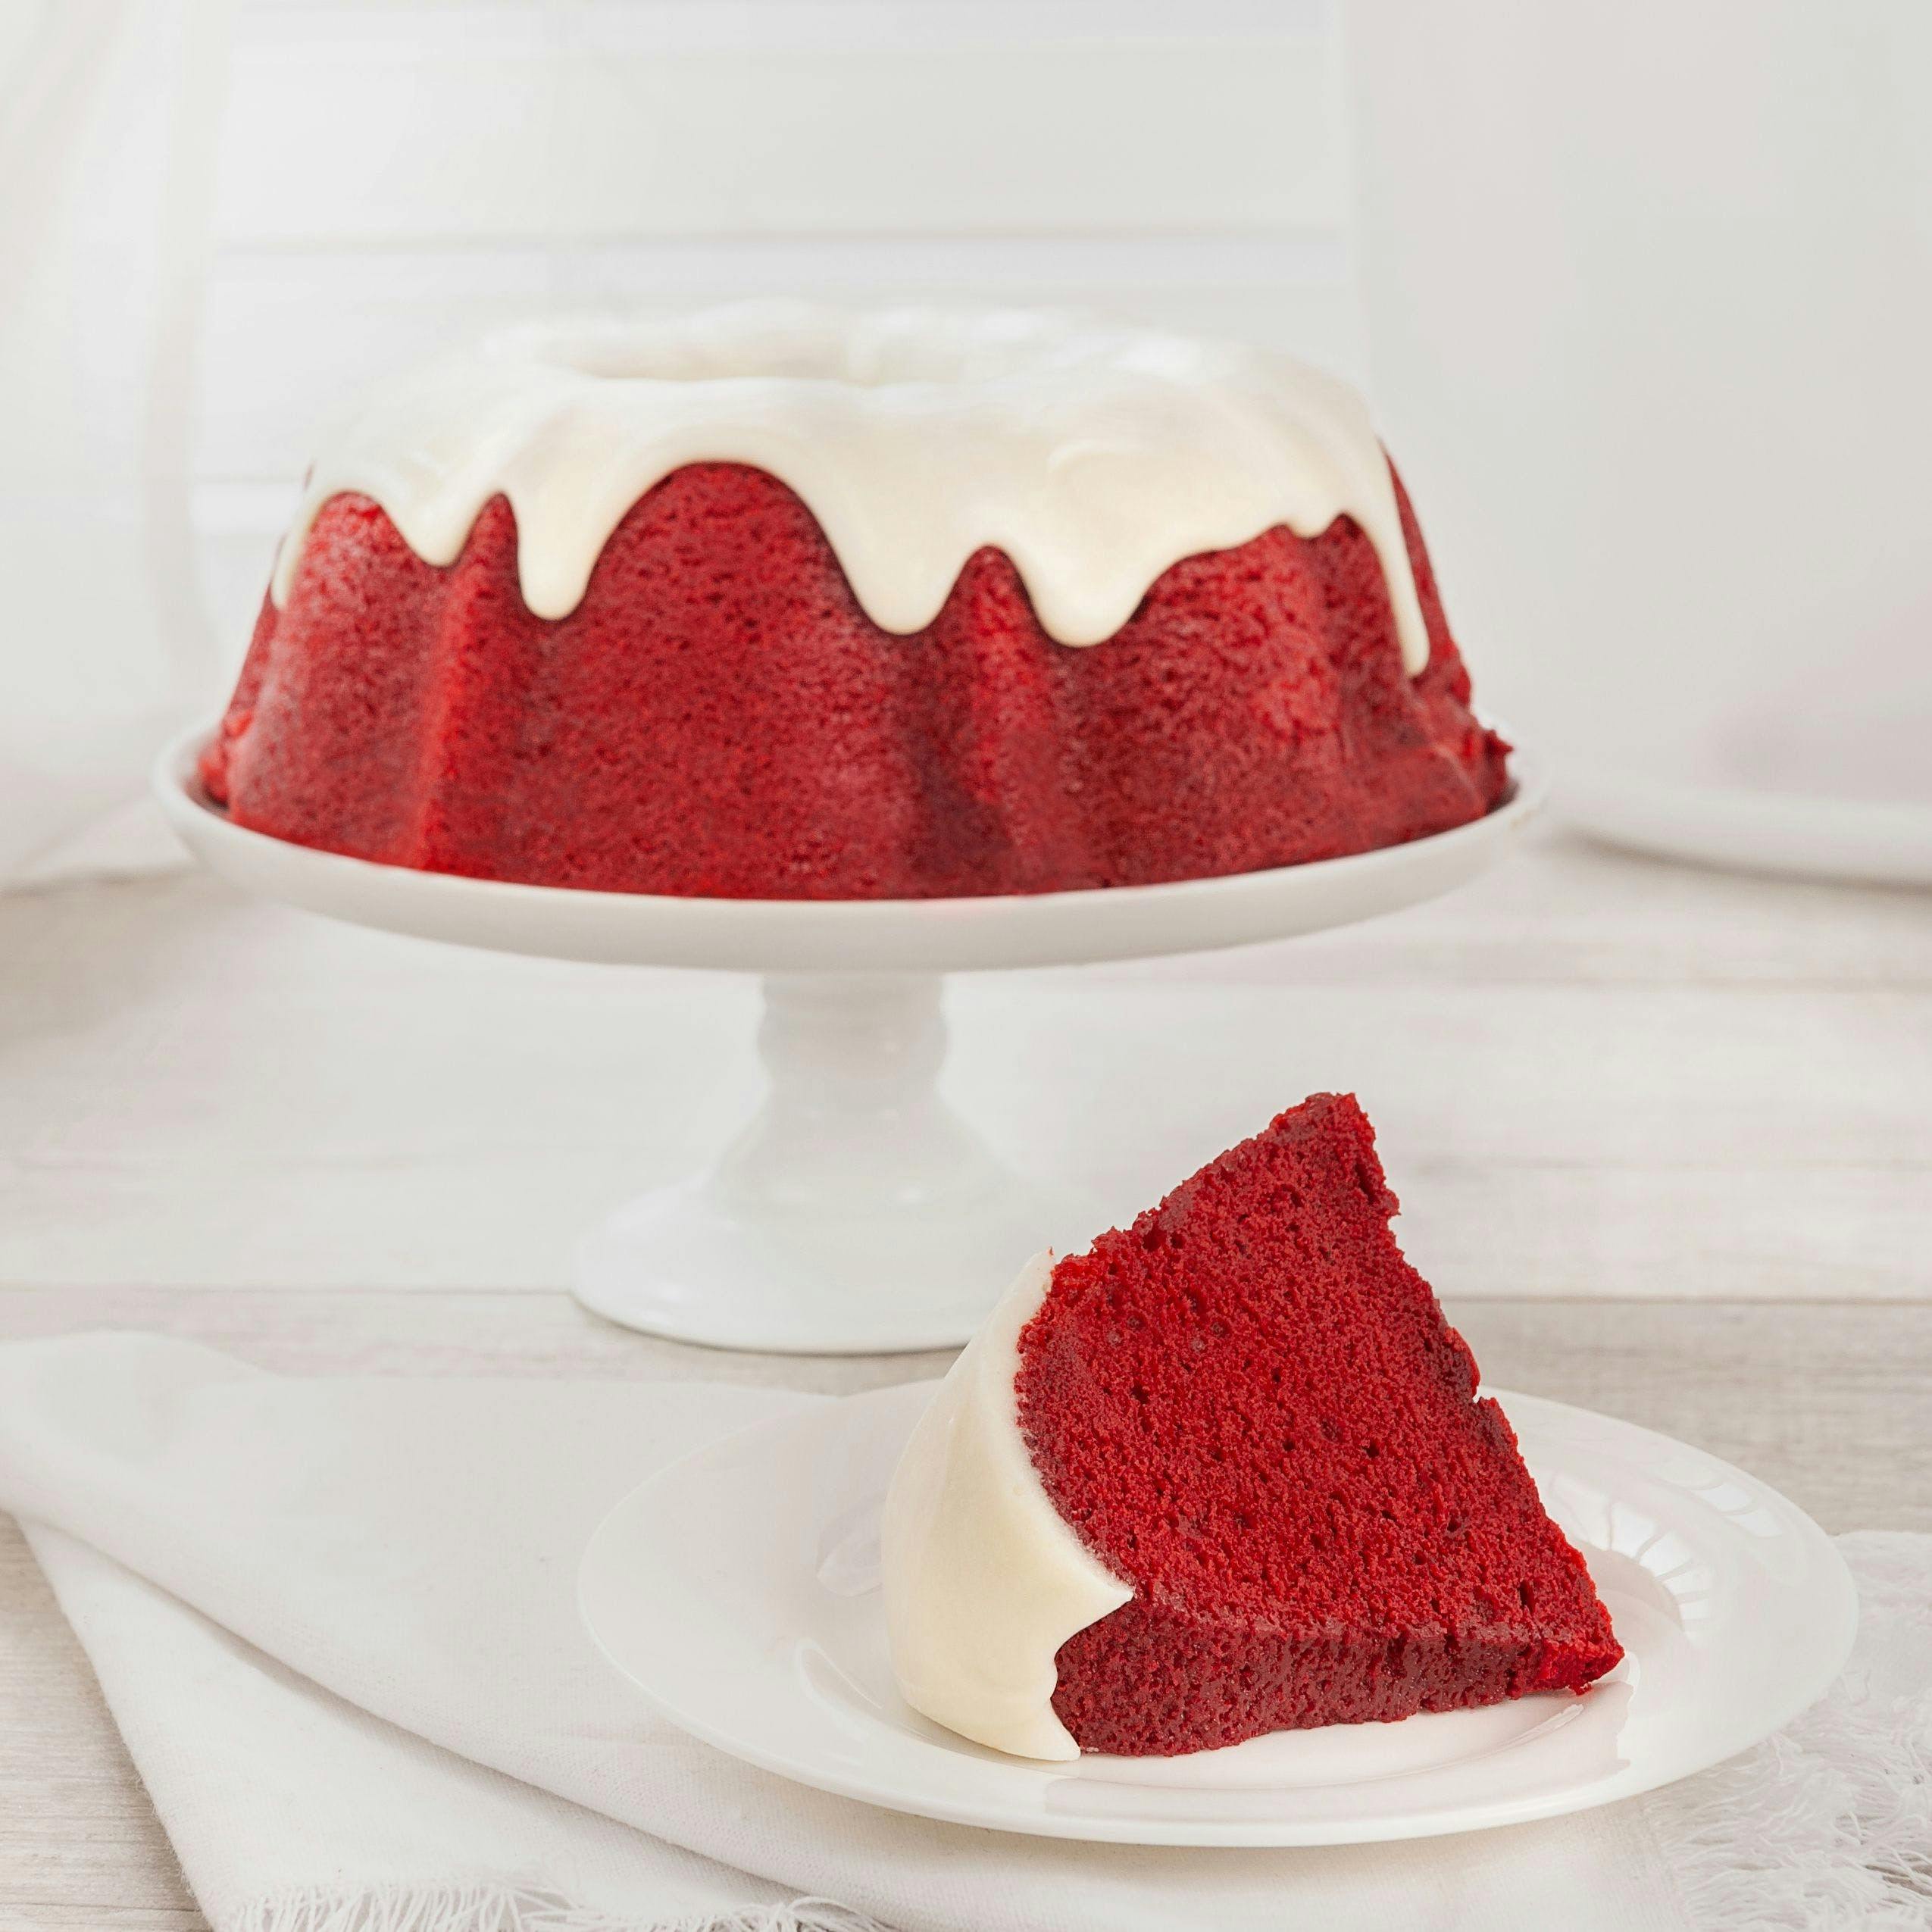 Nothing Bundt Cakes to give away free cake in September | WCBD News 2